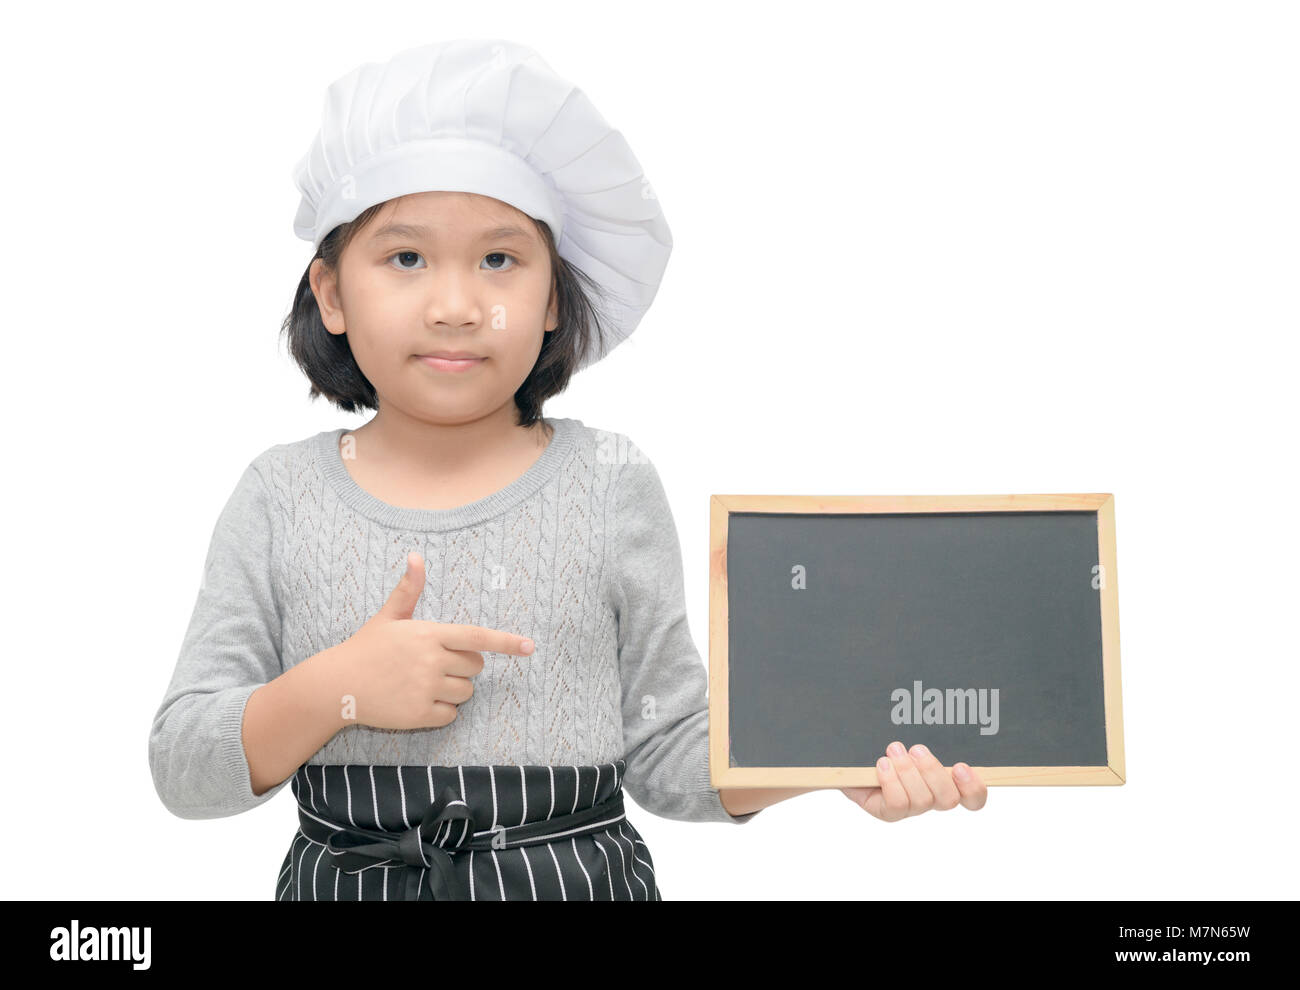 Little asian girl chef in uniform cook holding blackboard for in put text or menu, isolated on white background Stock Photo